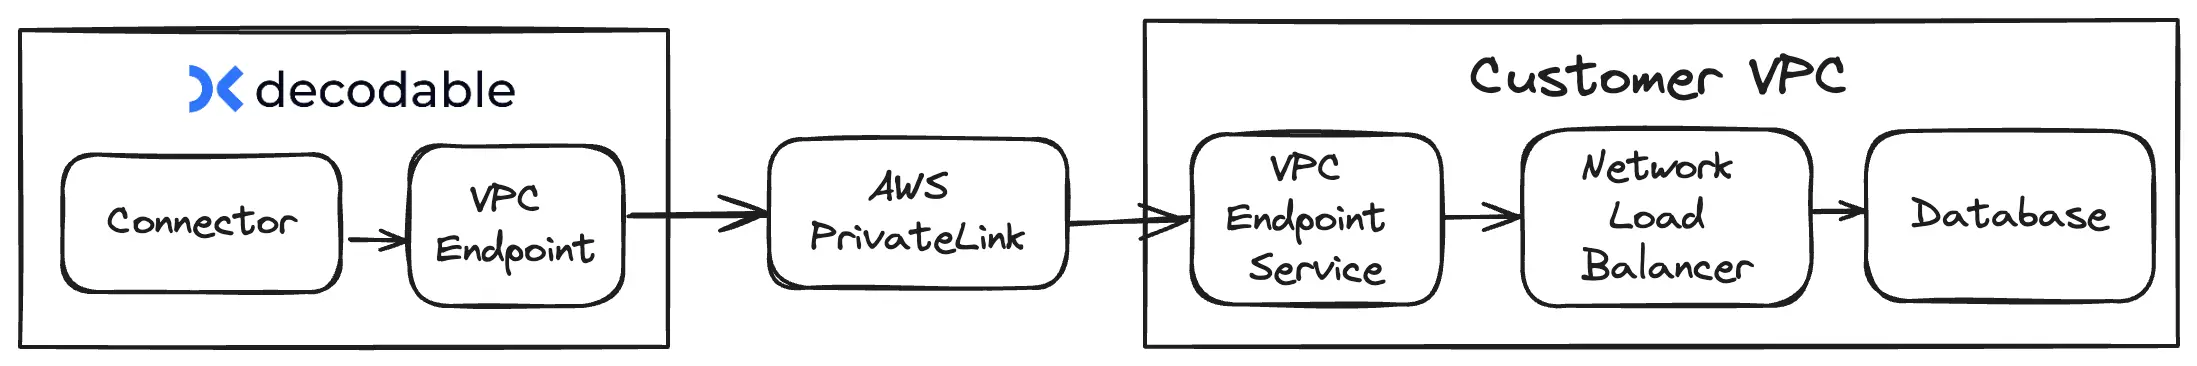 Decodable connects to a customer service via a VPC Endpoint Service and AWS Network Load Balancer